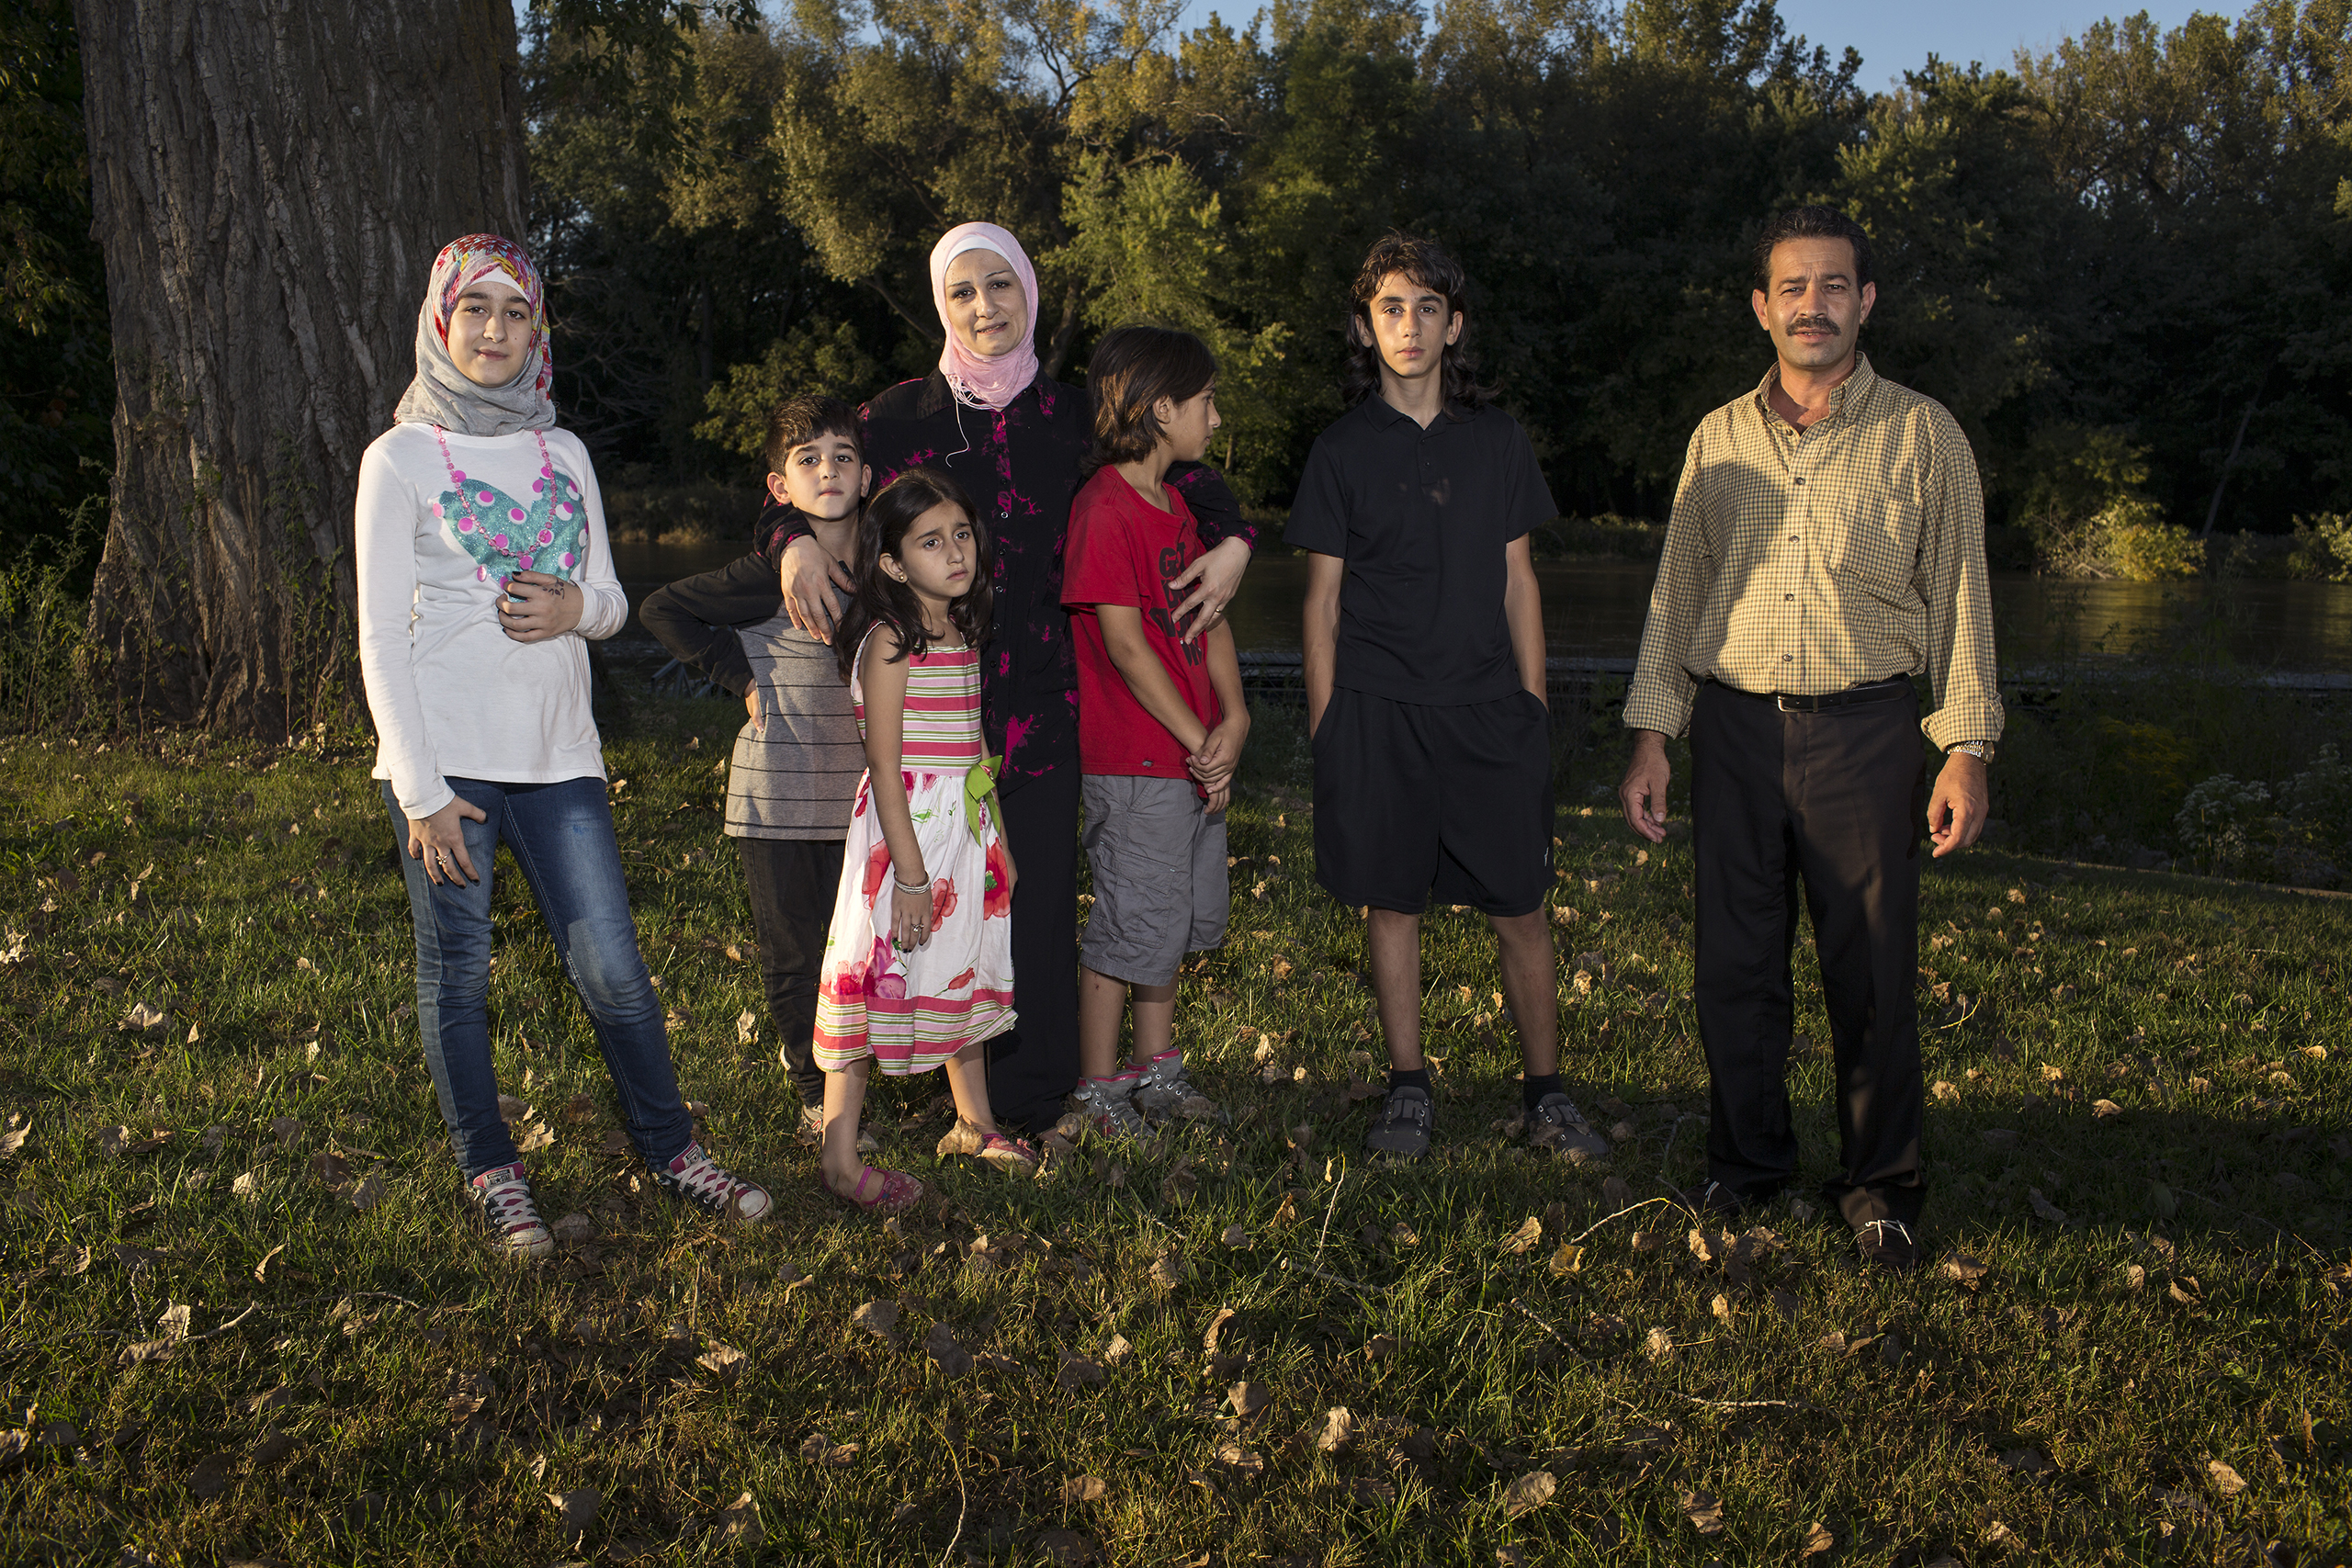 Ghazweh and Abdul Fattah at a park in Des Moines in 2016 with their children, from left to right: Sedra, Mutaz, Hala, Haidar and Nazeer. That year, the Tameems became the first Syrian refugee family to be resettled in Iowa. In the four decades of the U.S. refugee resettlement program, America has safely resettled more than three million of the world’s most vulnerable refugees with an average annual cap set at 95,000 prior to the Trump administration. (Danny Wilcox Frazier—VII for TIME)